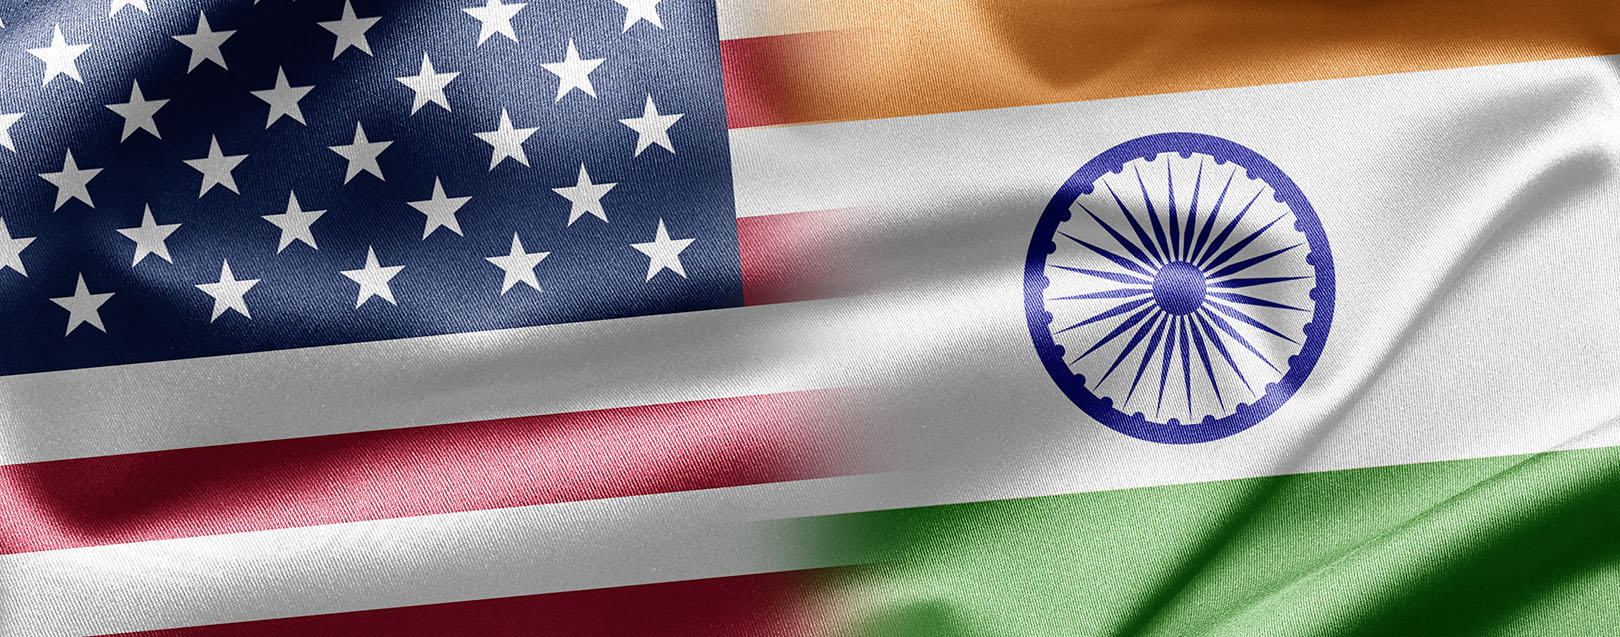 US asks India to remove customs duties on ICT items